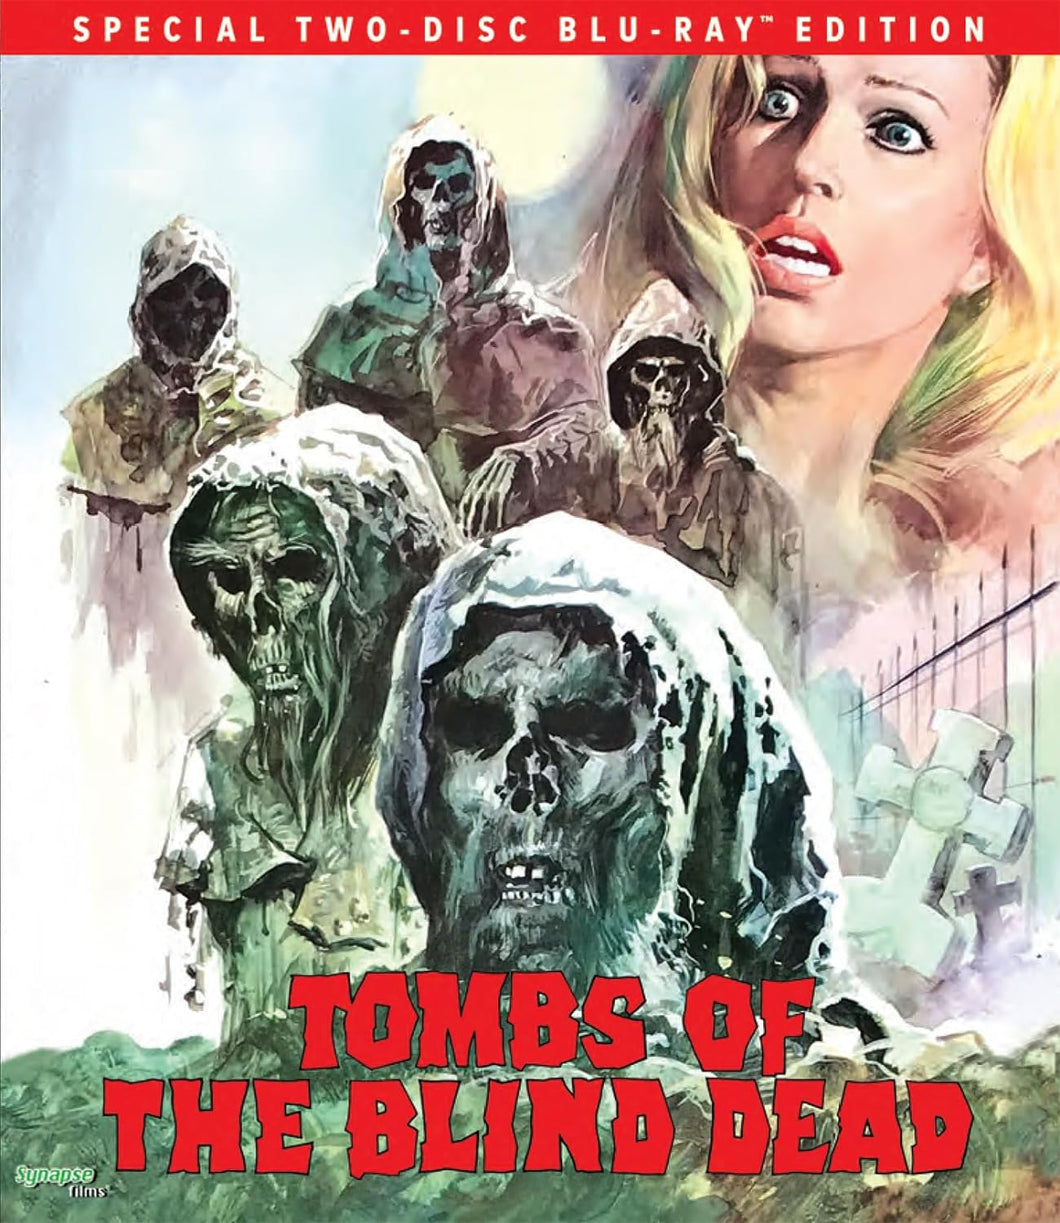 Motion Picture- Tombs Of The Blind Dead